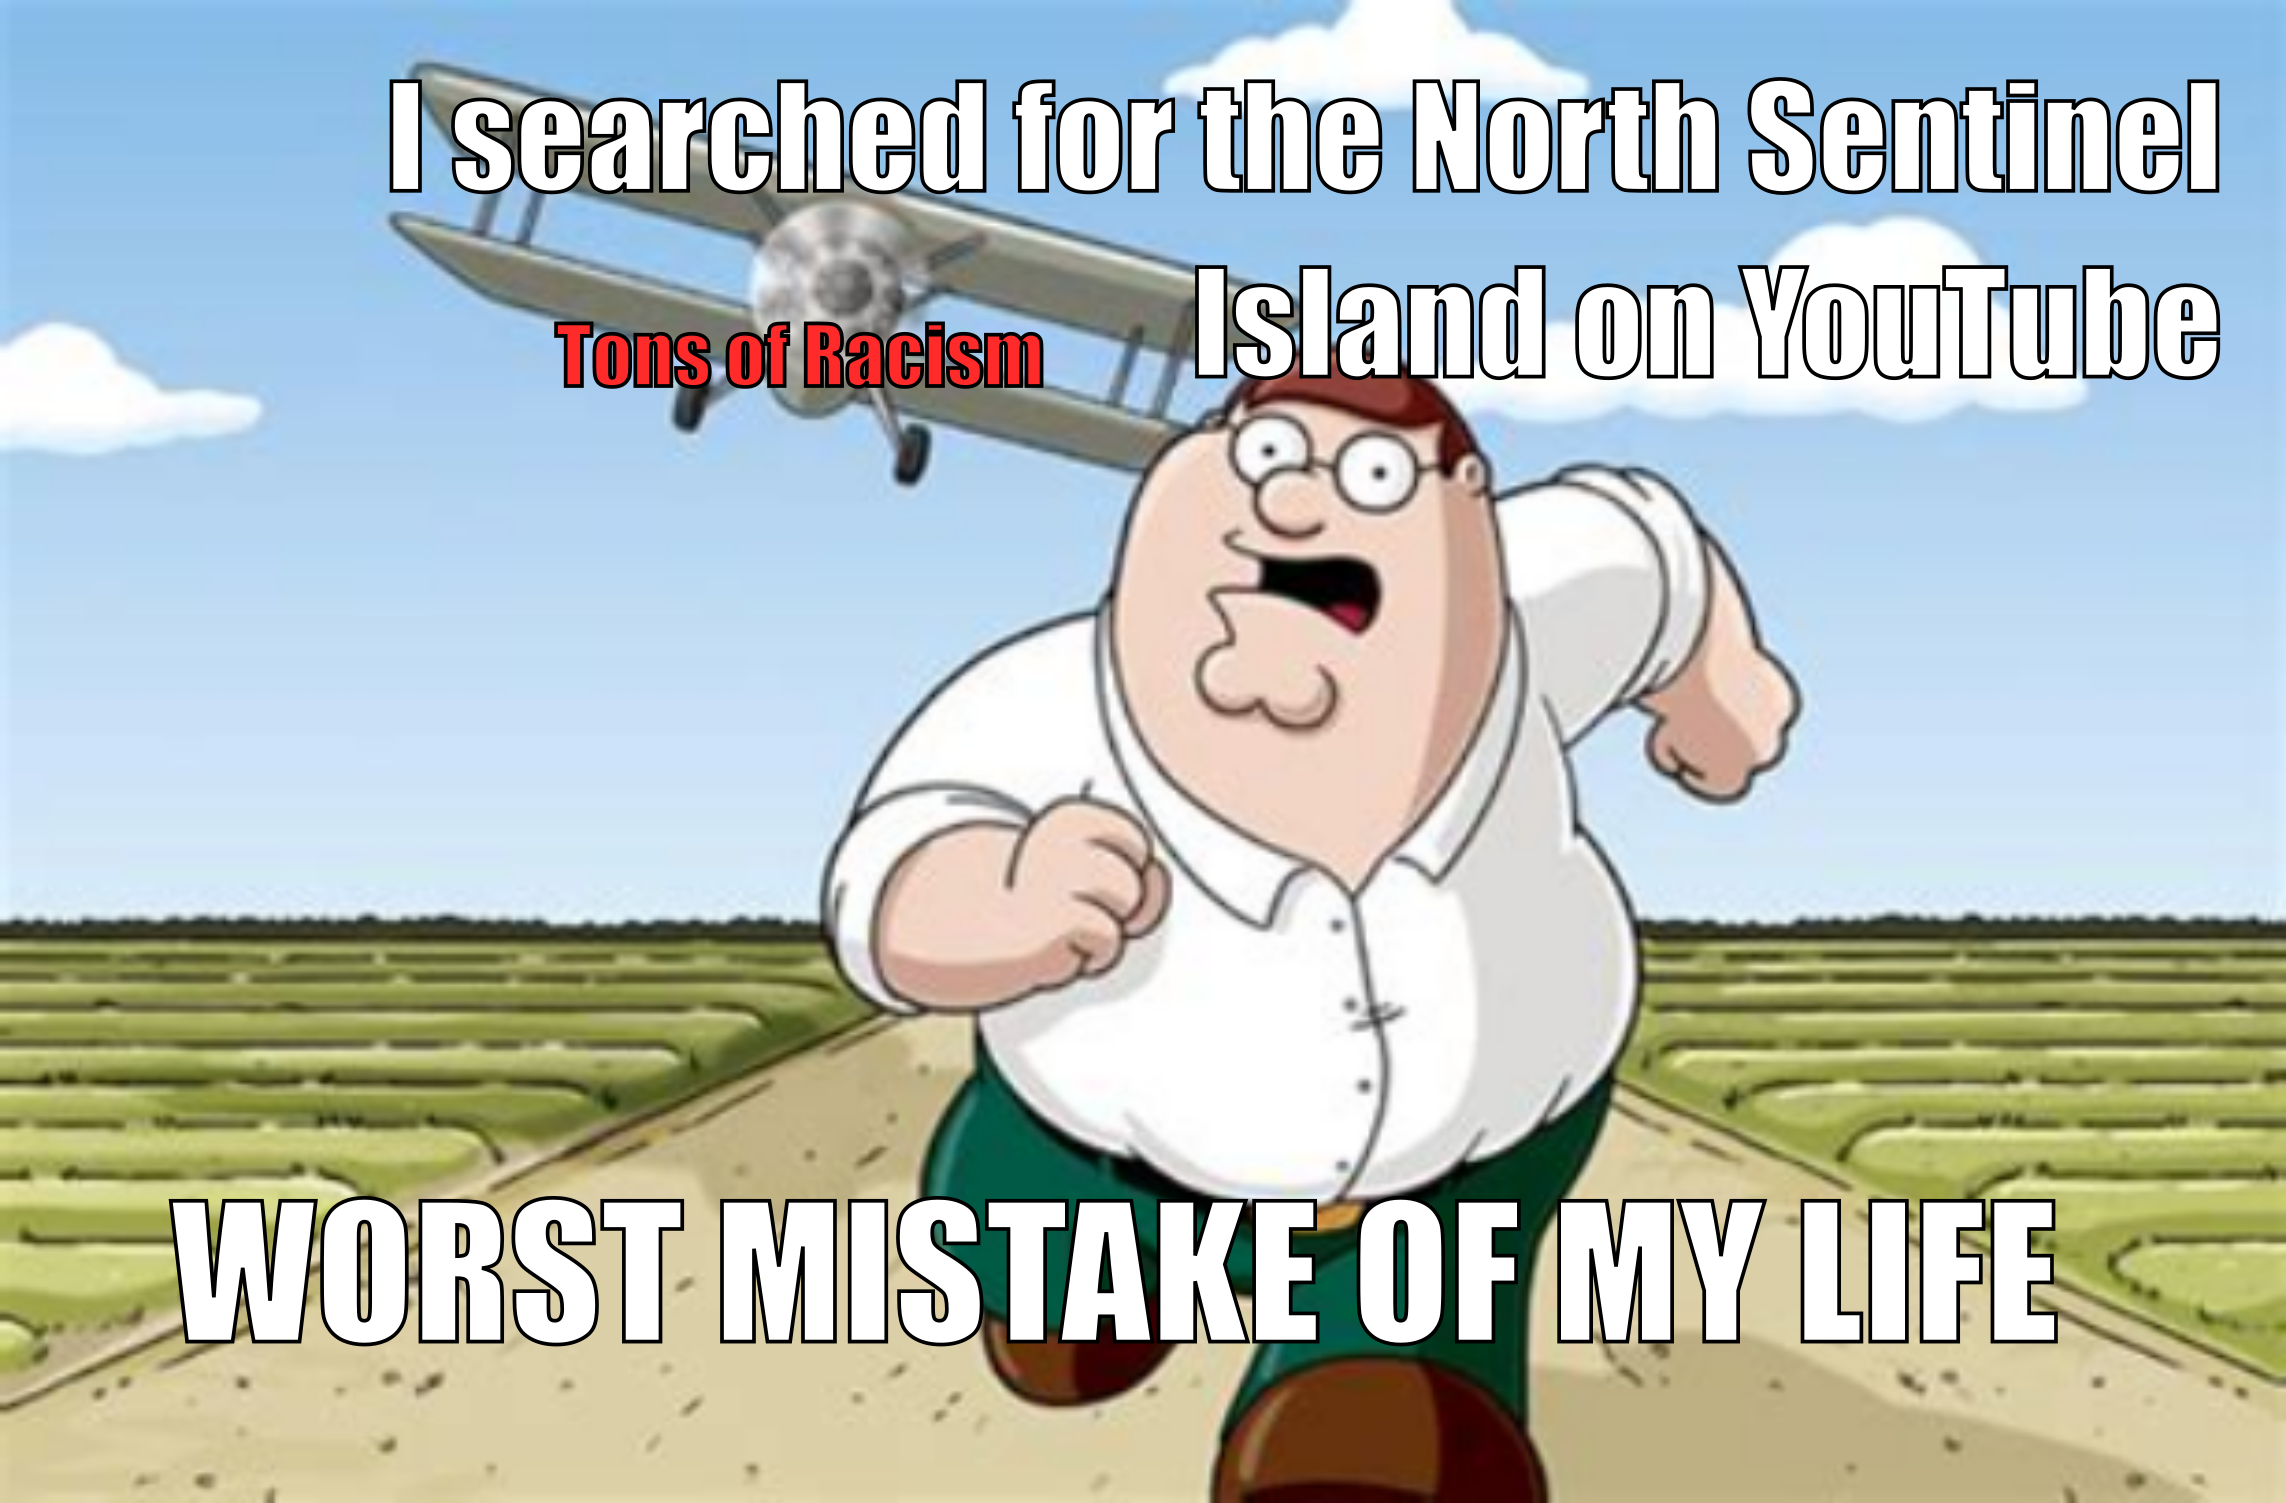 The worst mistake of my life meme; there is text on the top that says "I searched for the North Sentinel Island on YouTube", text on a plane landing towards Peter Griffin that shows "Tons of Racism", and the uppercase text "WORST MISTAKE OF MY LIFE" at the bottom of the picture.